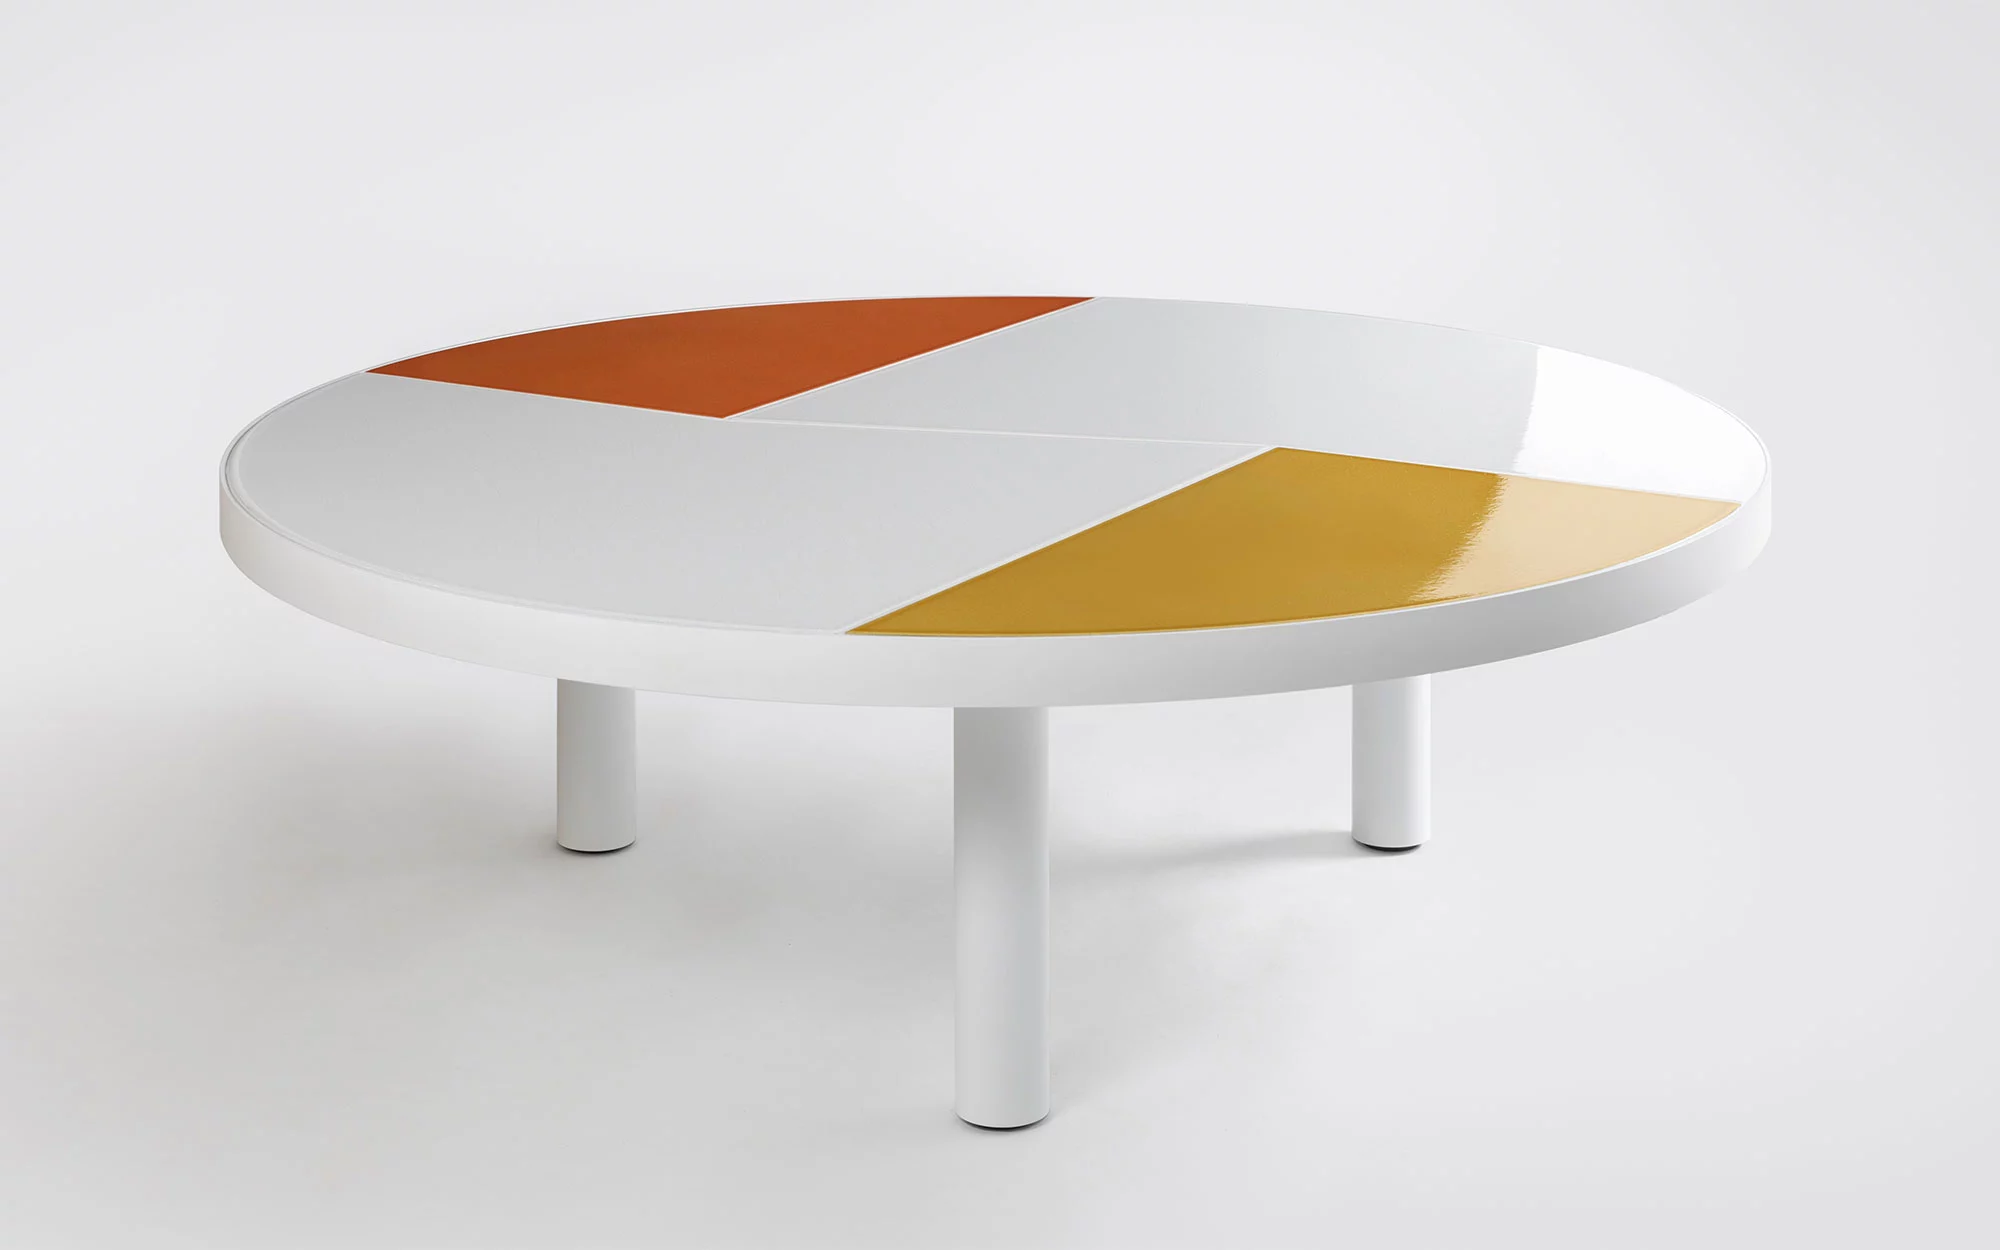 Fraction Coffee Table - Pierre Charpin - coffee-table - Galerie kreo